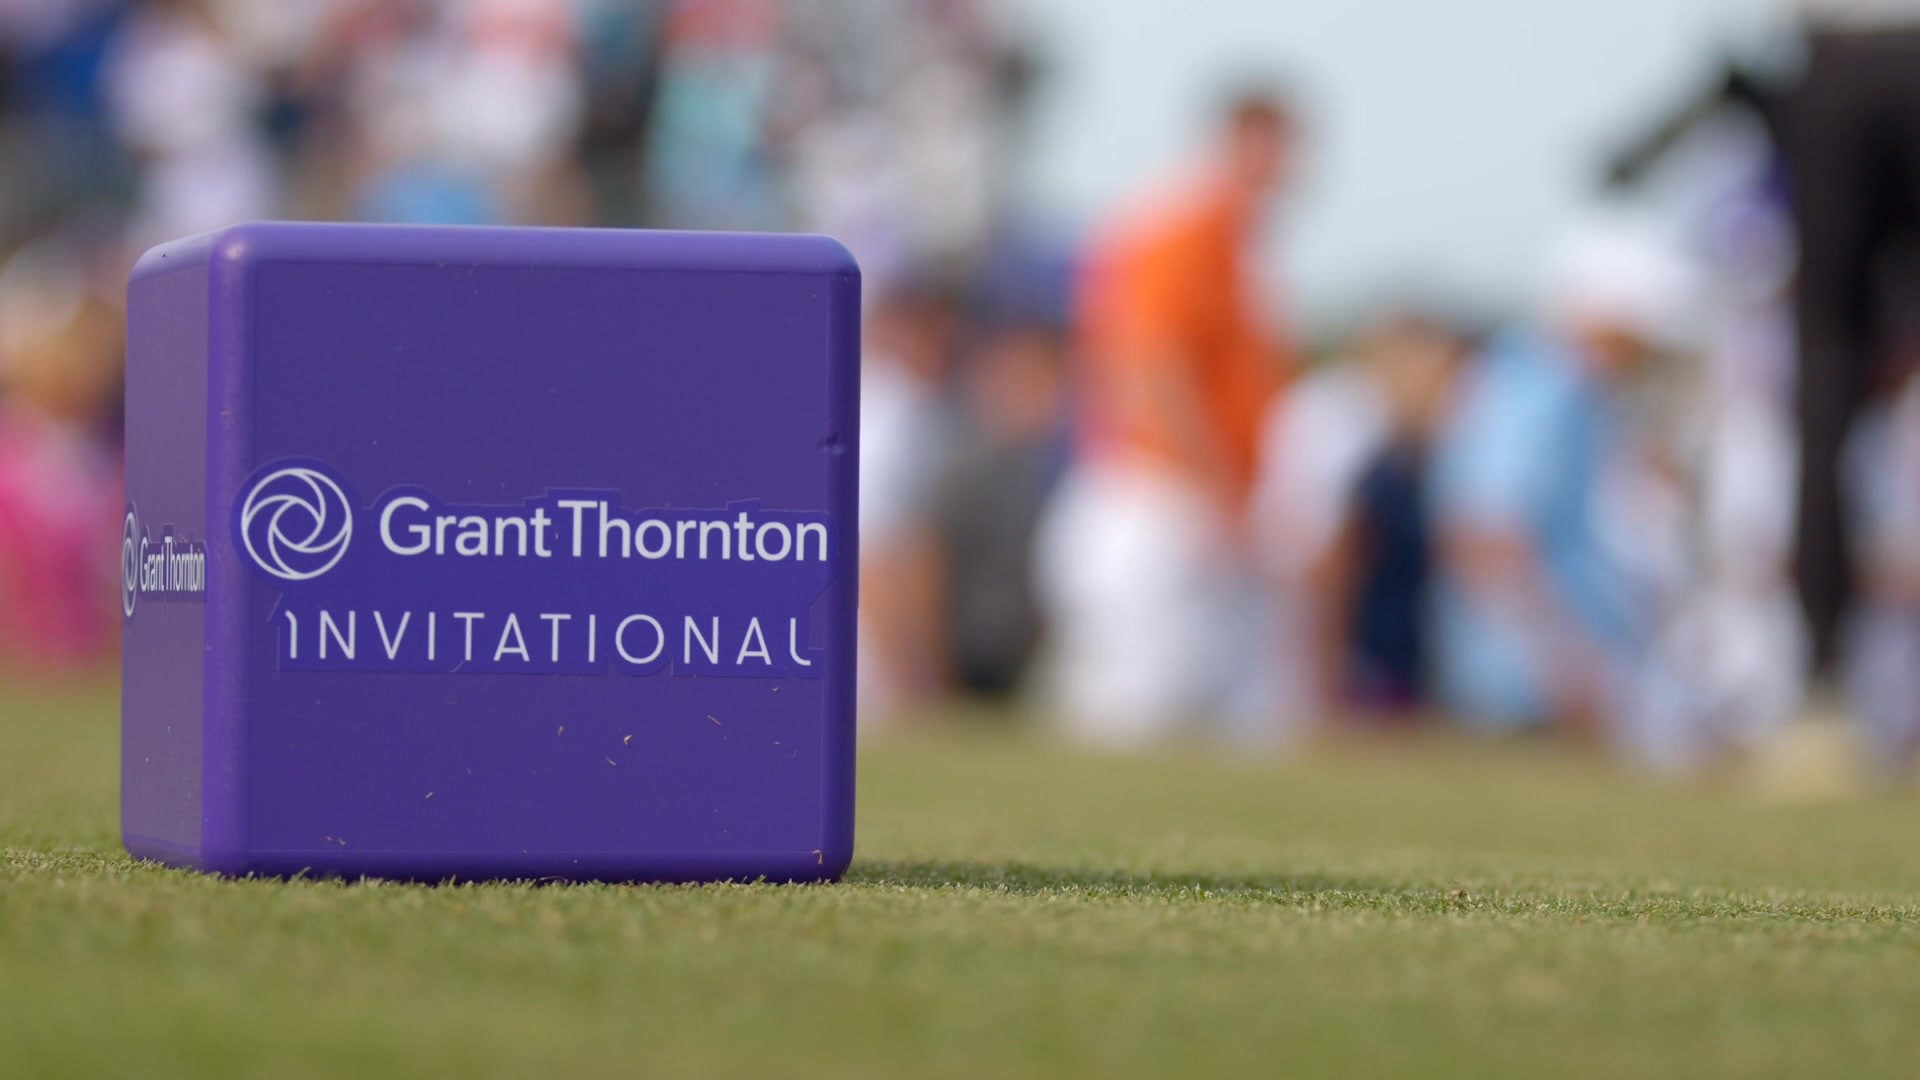 The Grant Thornton Invitational - Two Tours. One Competition.